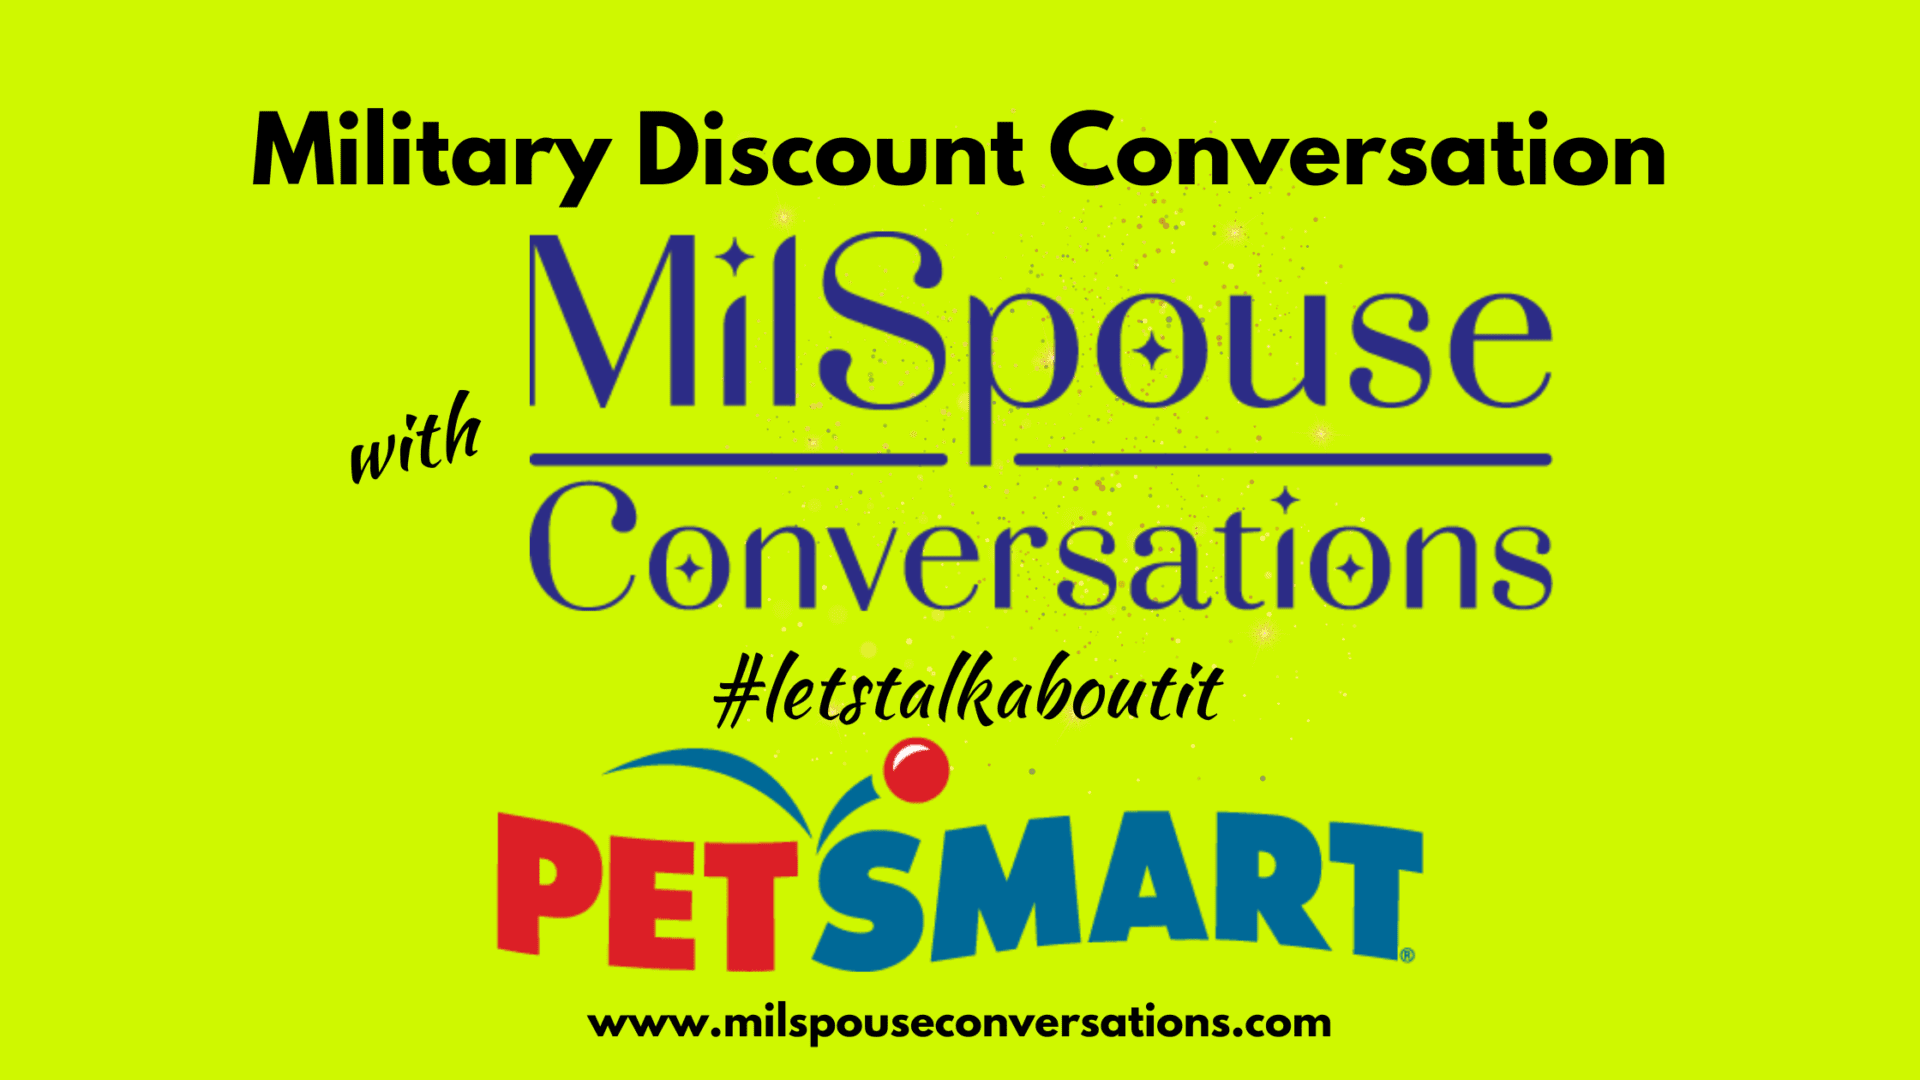 Military discount conversation with petsmart